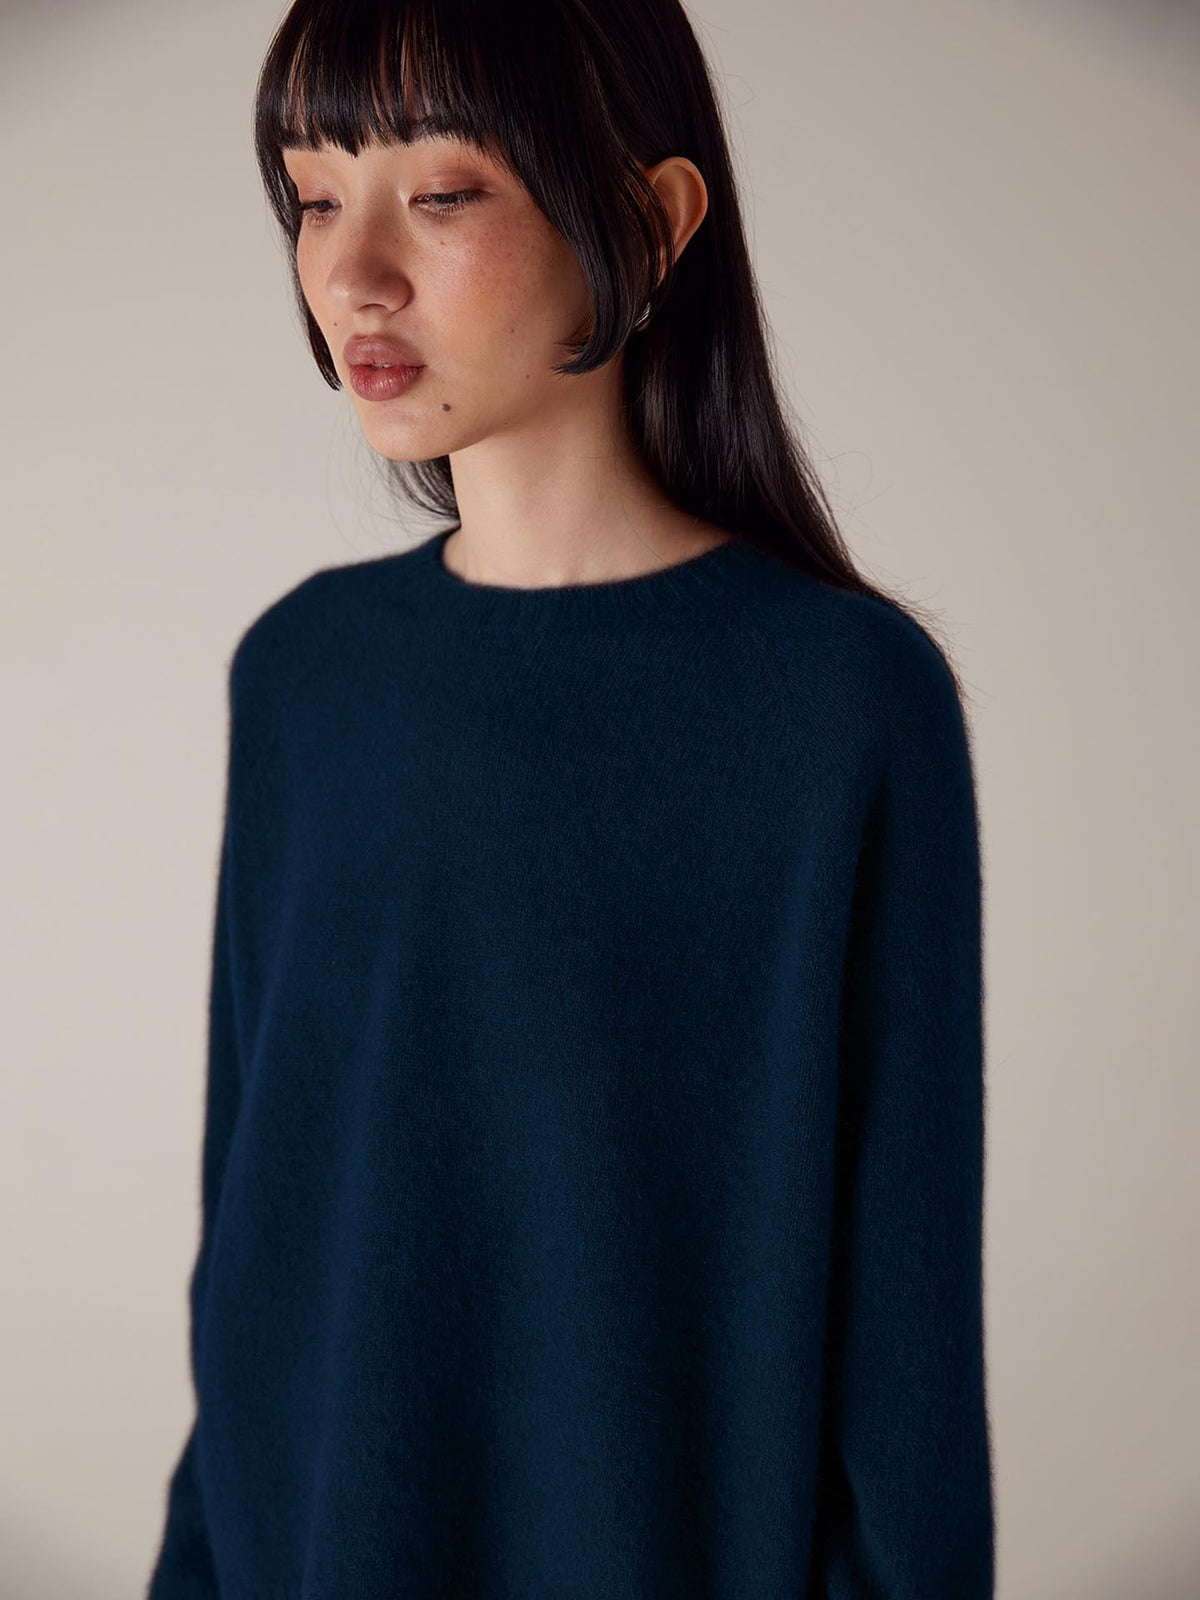 A petite woman with bobbed hair wearing a Francie Nimbus Raglan Knit in Midnight, looking downward in a softly lit setting.